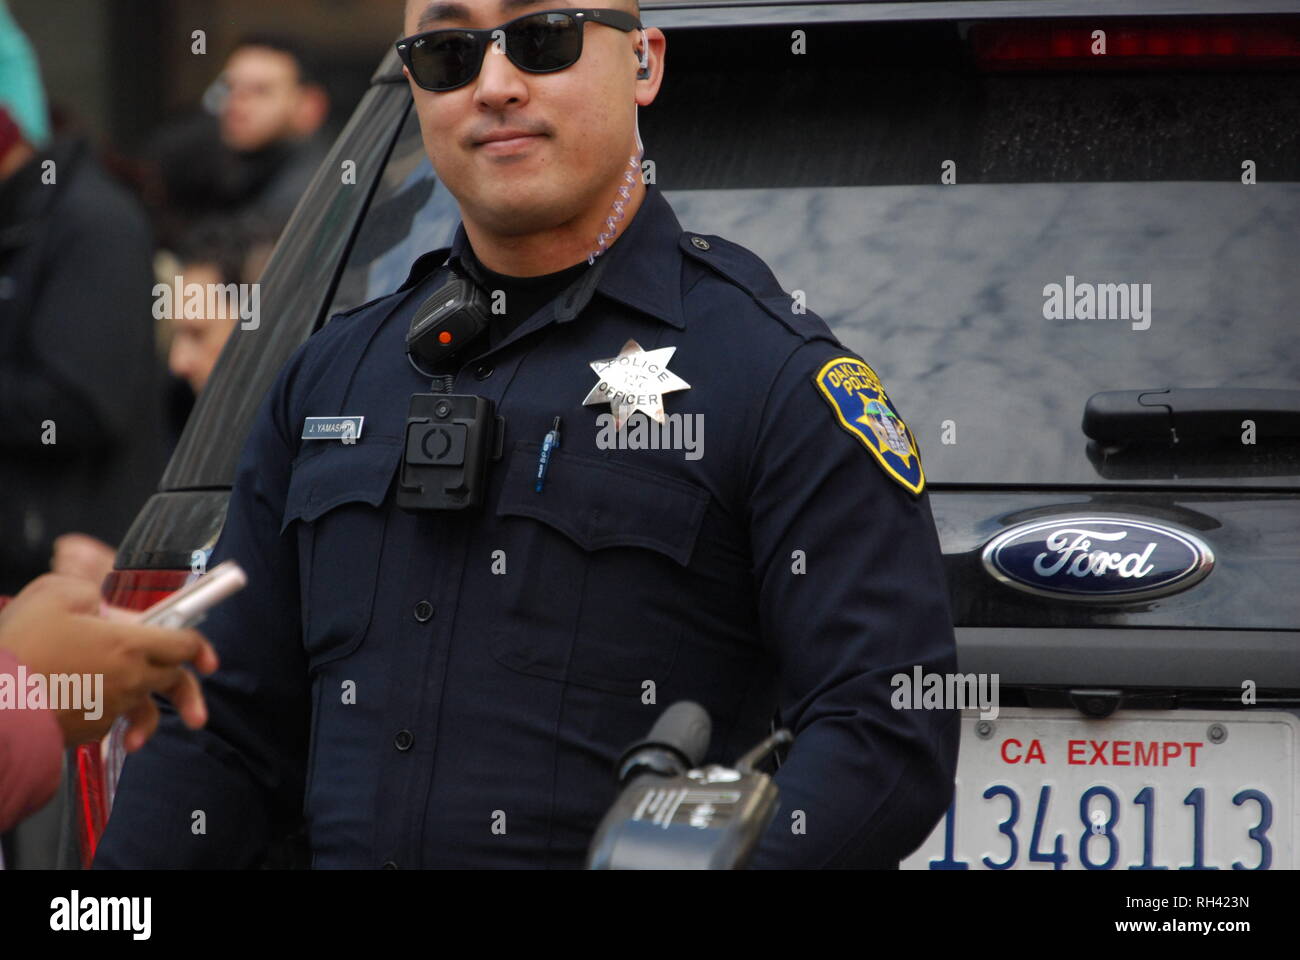 Oakland police Officer James Yamashita providing security outside a Kamala Harris for President rally in downtown Oakland on Jan. 27, 2019. Stock Photo